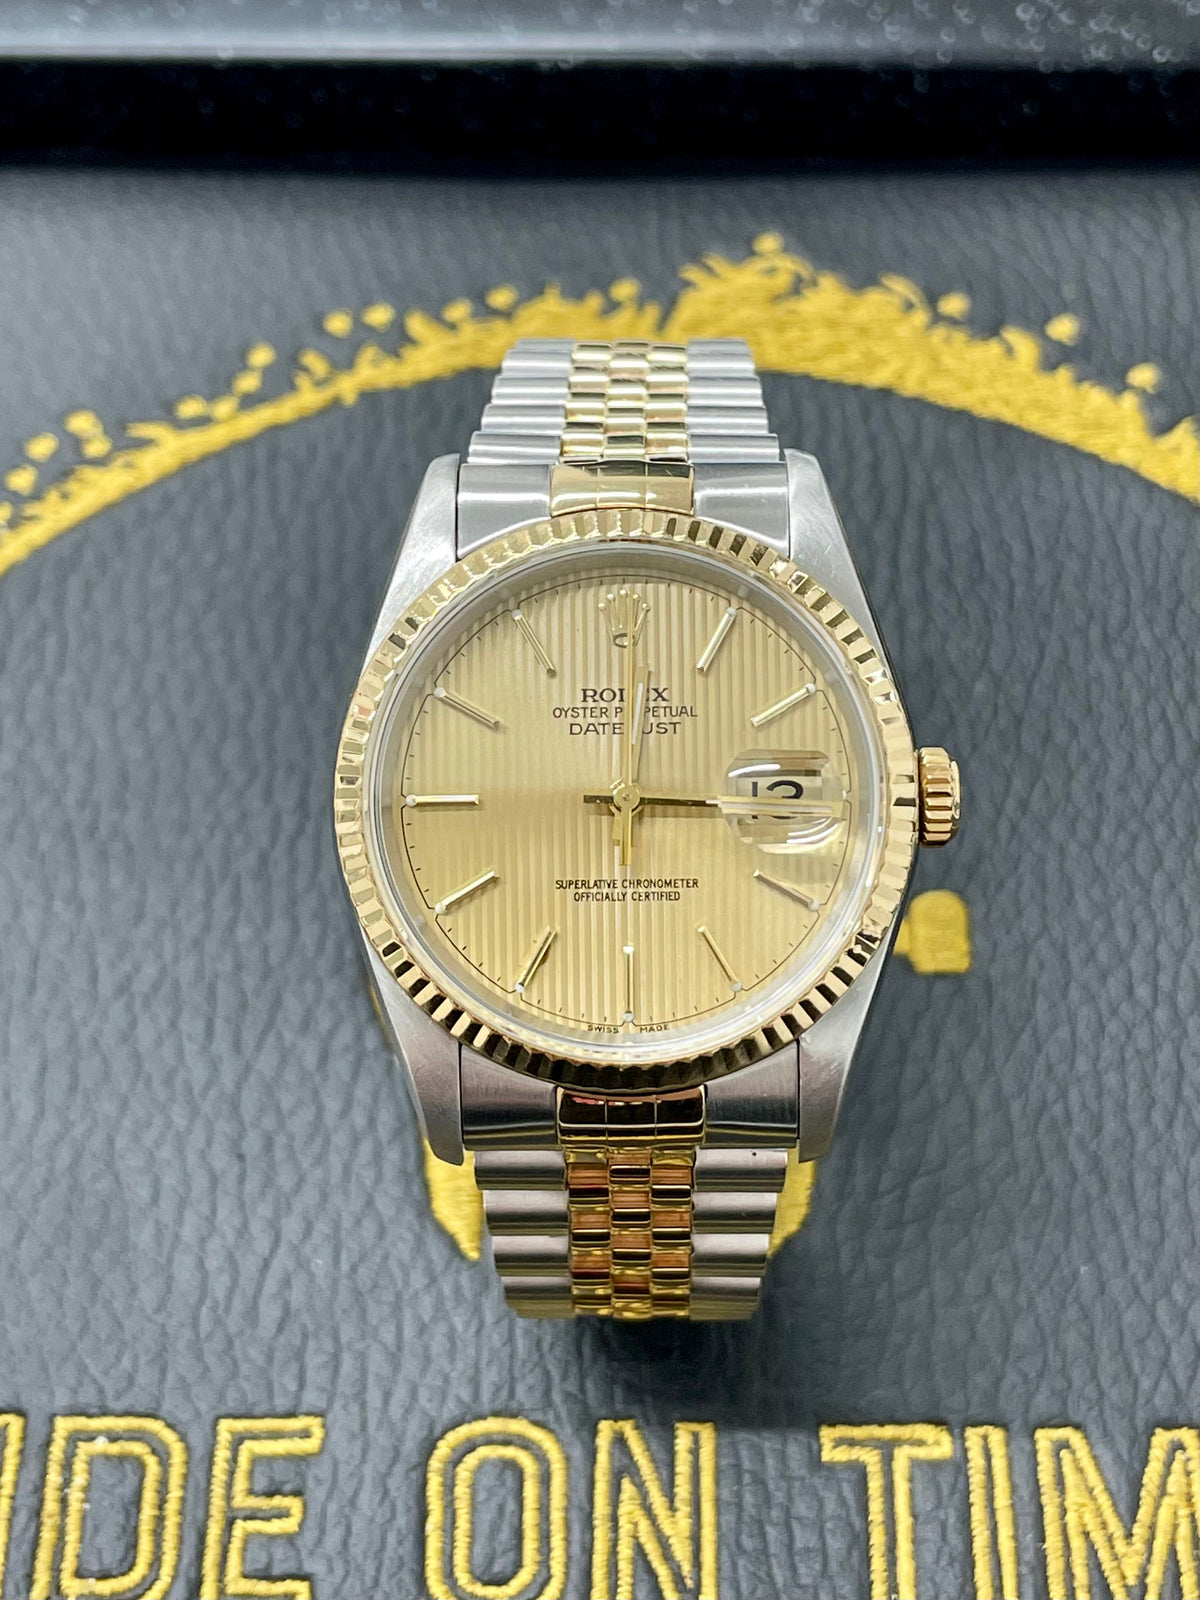 Rolex Datejust 36mm Factory Champagne Tapestry Dial ‘16233’ - Ride On Timee